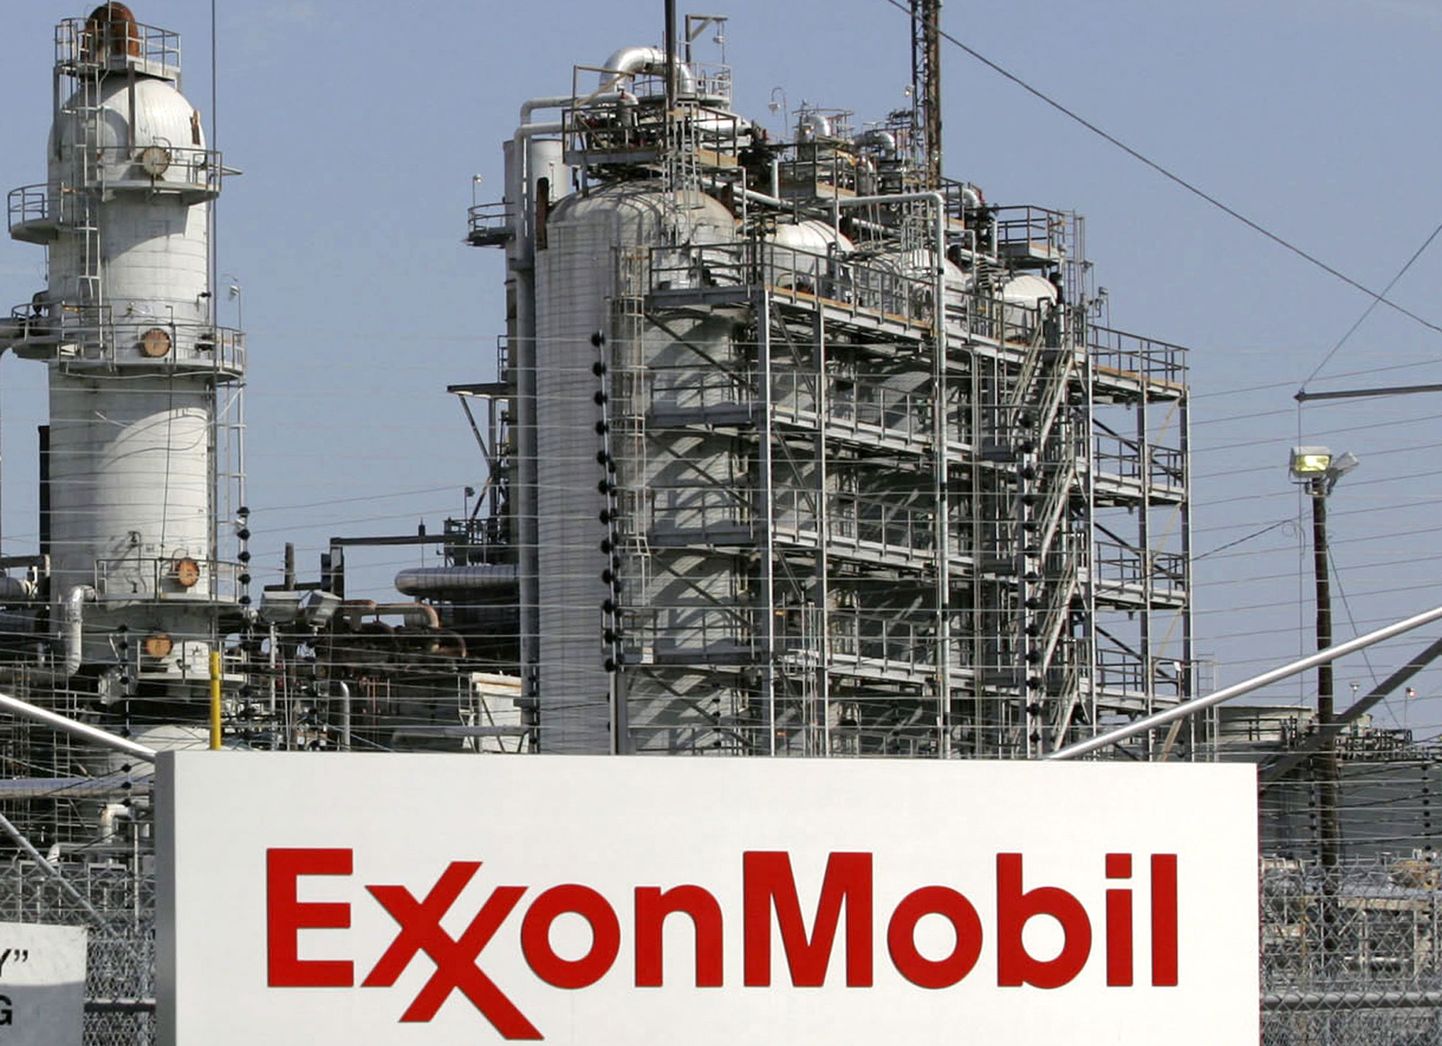 The Exxon Mobil refinery in Baytown, Texas is seen in this September 15, 2008 file photograph.  The world's largest publicly traded oil company's fourth-quarter profit narrowly beat Wall Street's expectations as rising crude oil prices offset falling margins for chemicals, engine lubricants and fuel as reported by the Irving, Texas-based company January 31, 2012. Picture taken September 15, 2008.   REUTERS/Jessica Rinaldi/Files    (UNITED STATES - Tags: ENERGY BUSINESS)